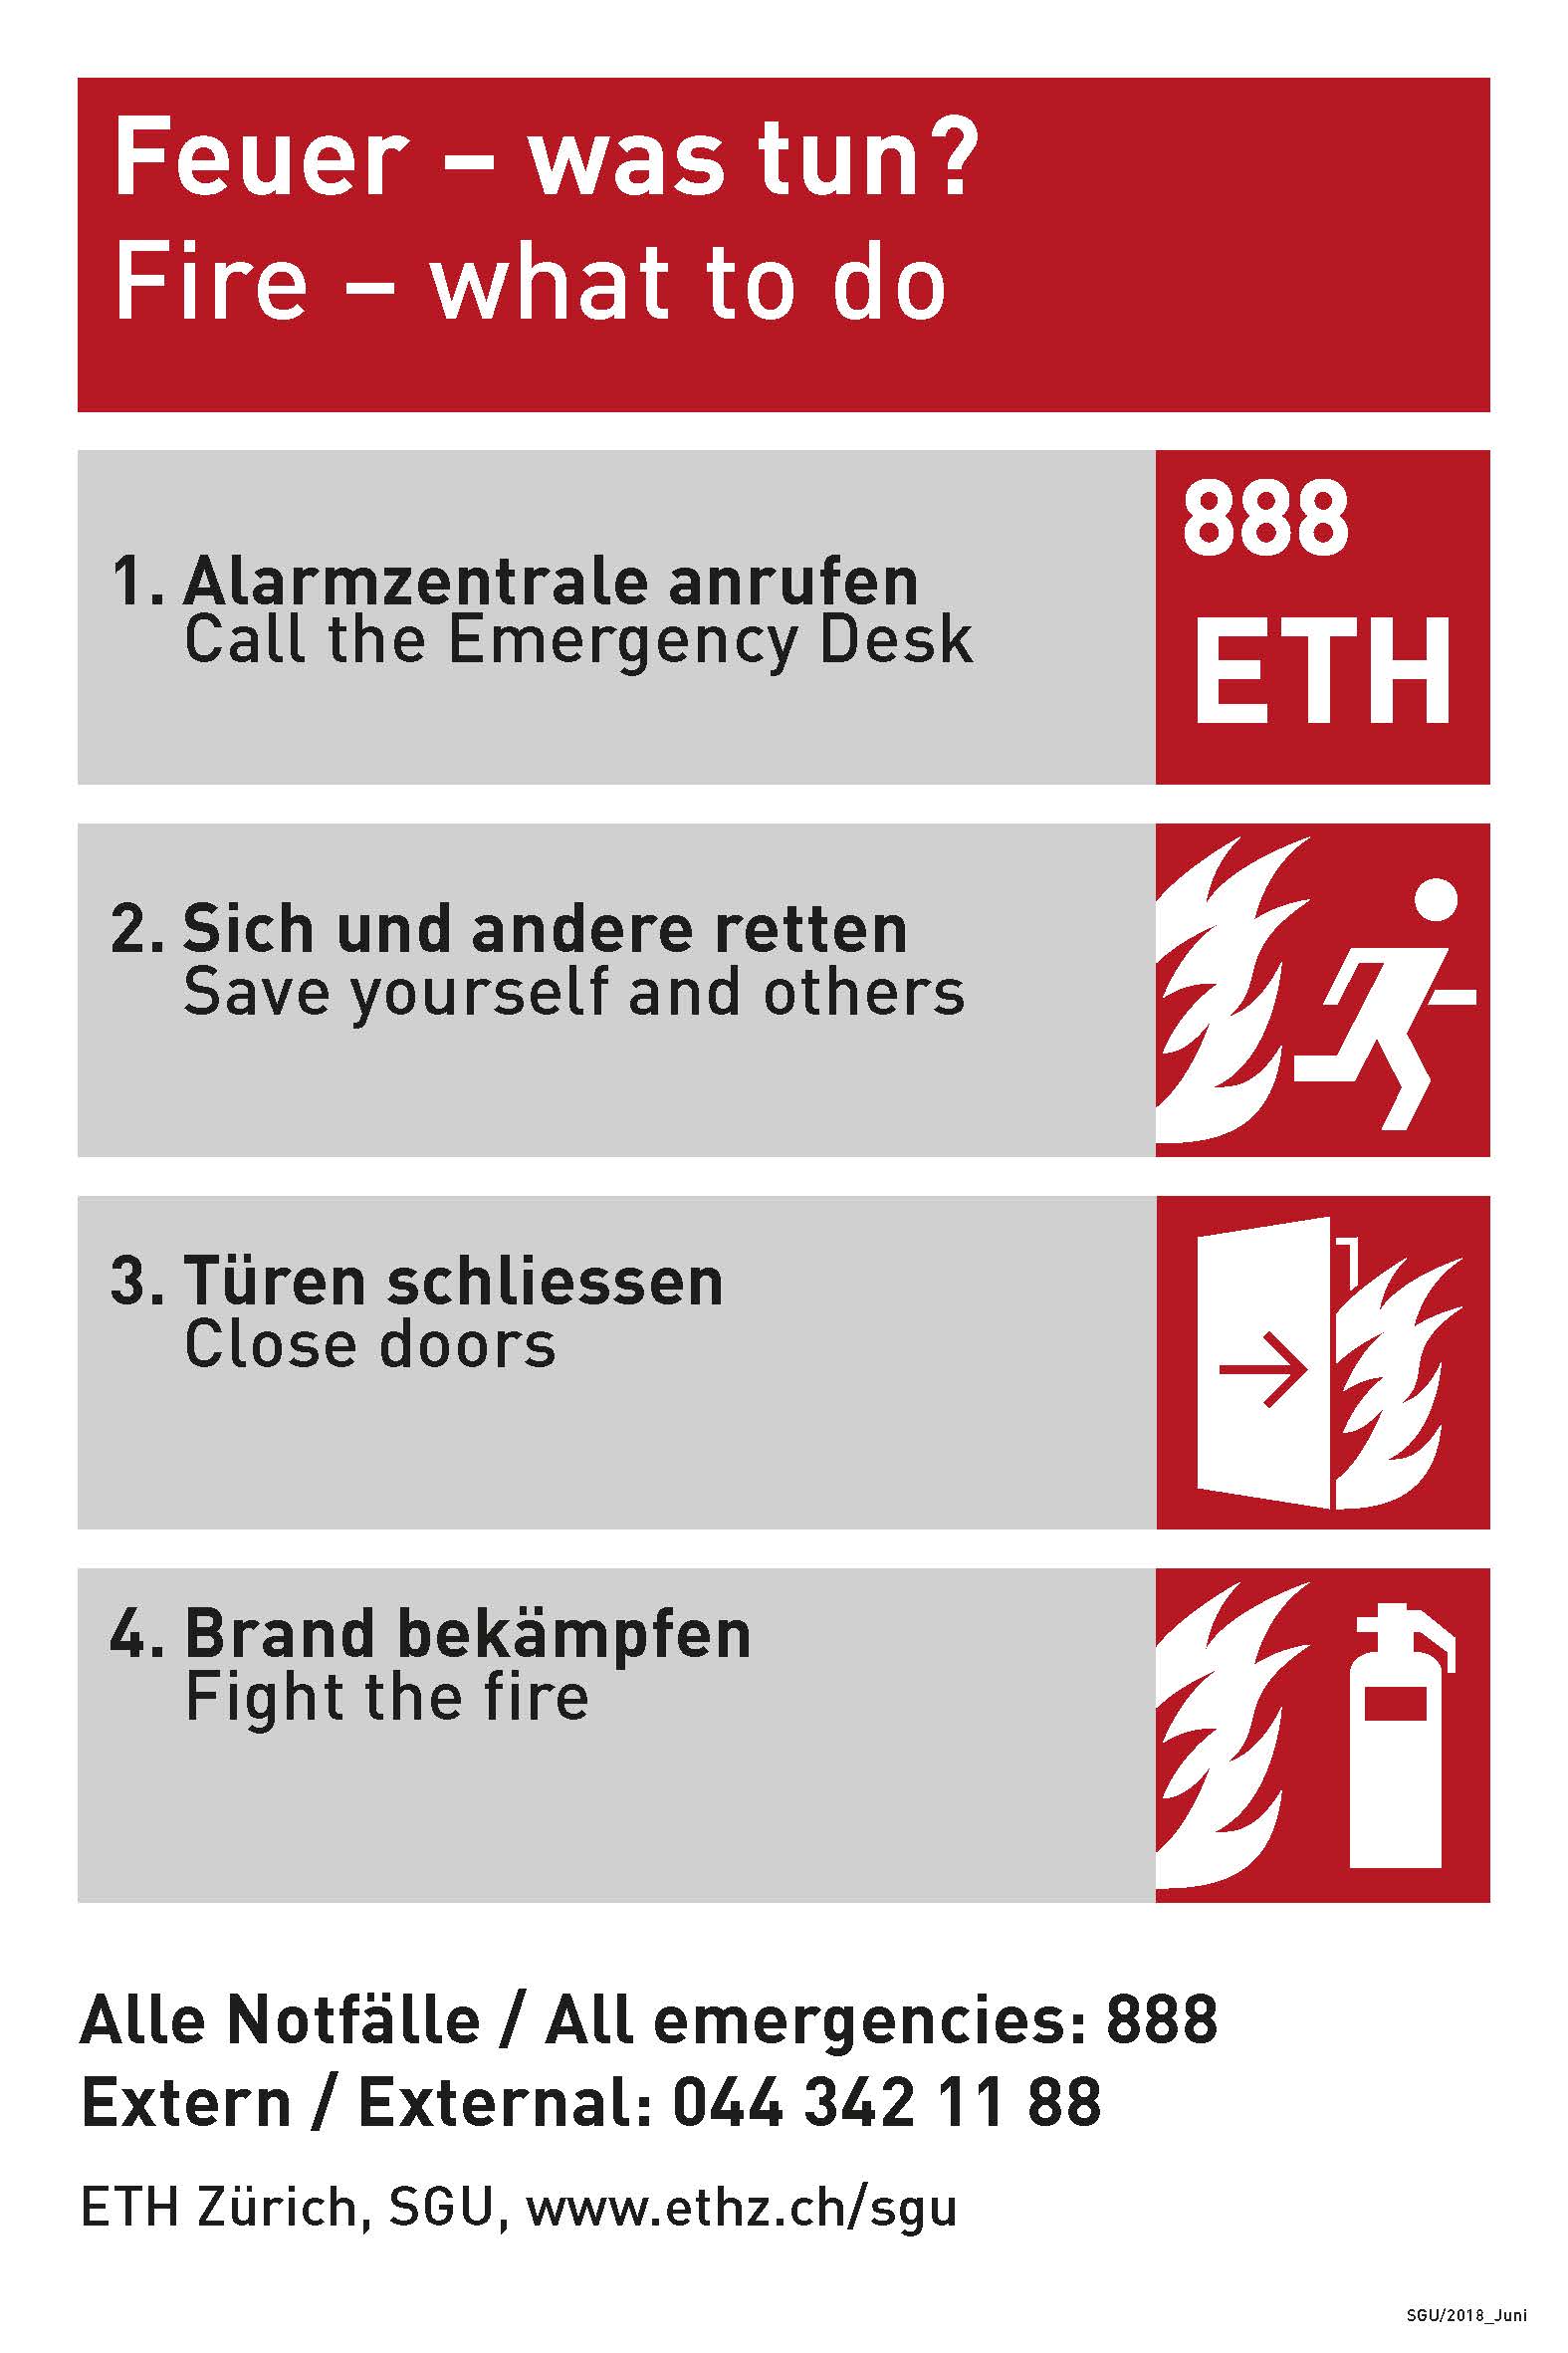 Enlarged view: Fire– what to do? 1. Call 888 2. Save yourself and others 3. Close doors 4. fight the fire